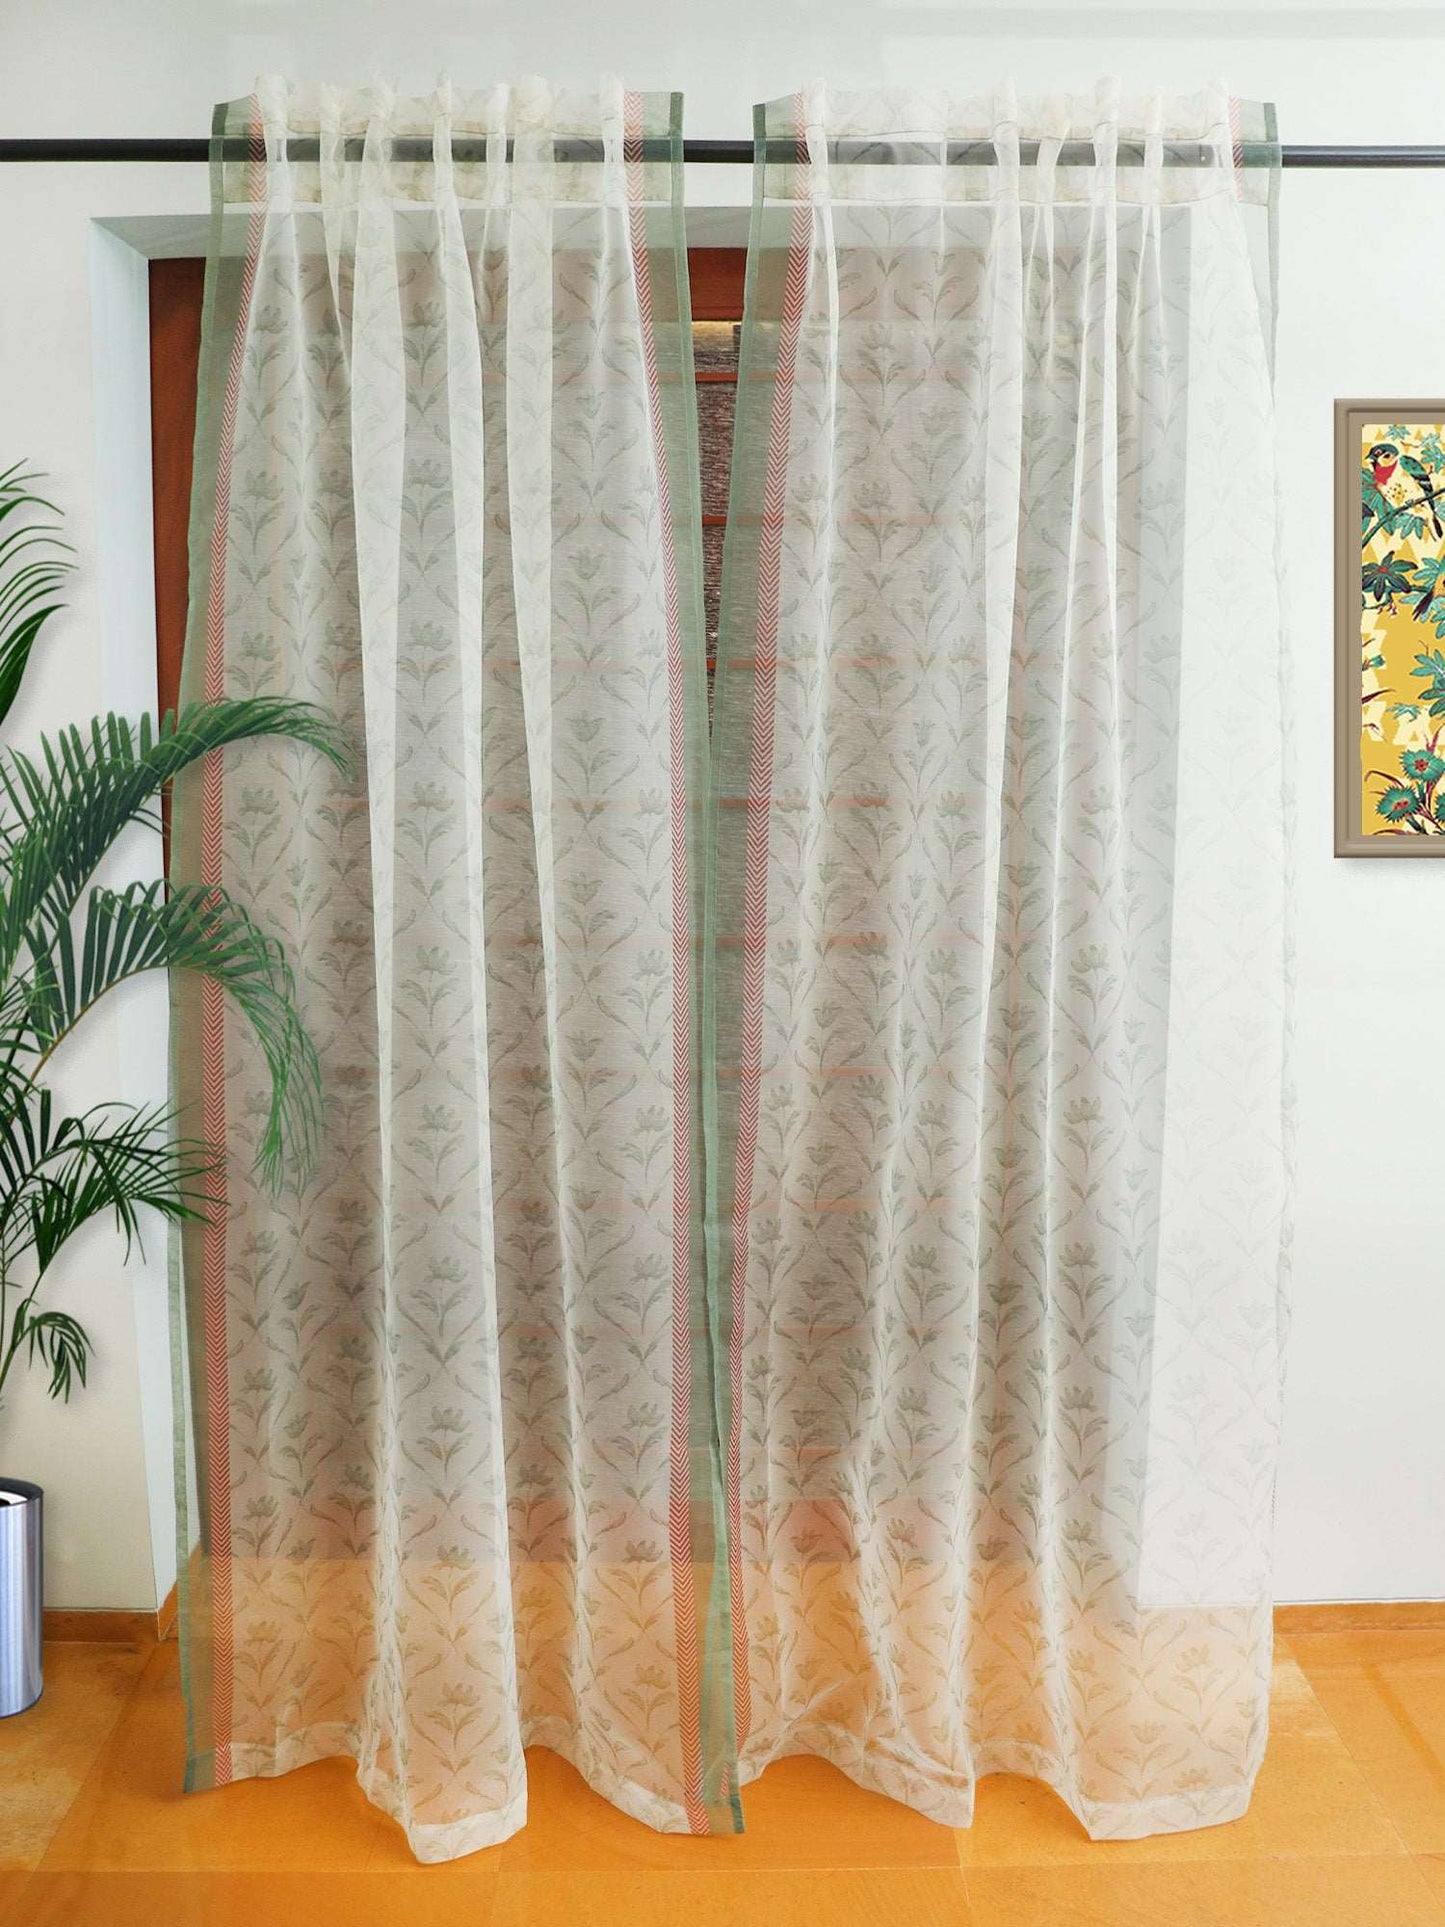 ZEBA World Transparent Organza Sheer Curtain for Door | Bedroom and Living Room | Soft and Light Weight | Floral Printed with Hidden Loop in Multicolor - 50x80 inches (7feet Long) (Pack of 2)